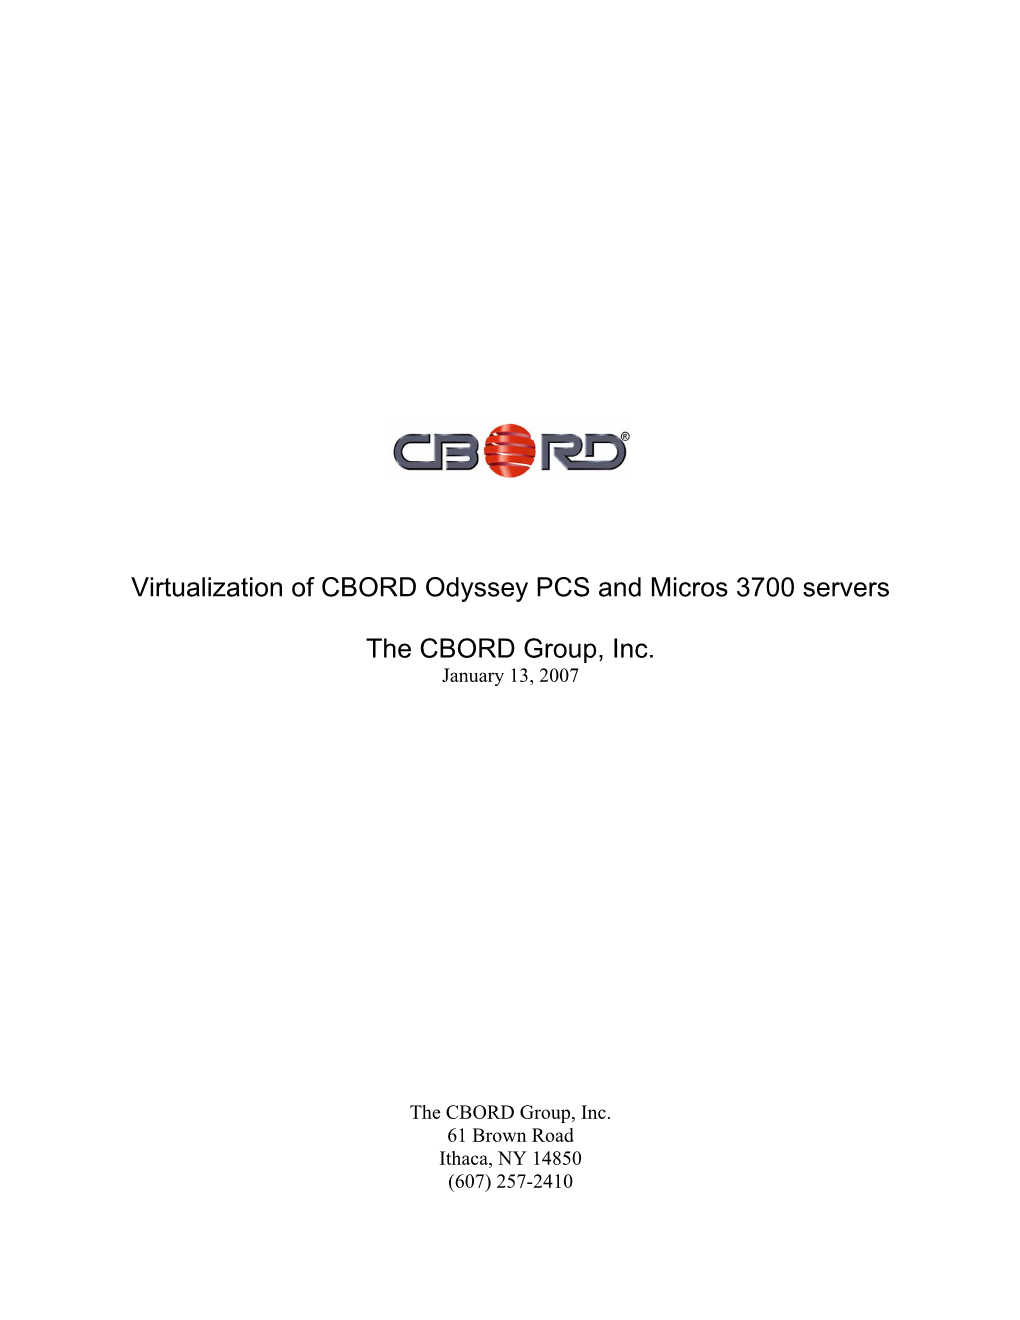 Virtualization of CBORD Odyssey PCS and Micros 3700 Servers The